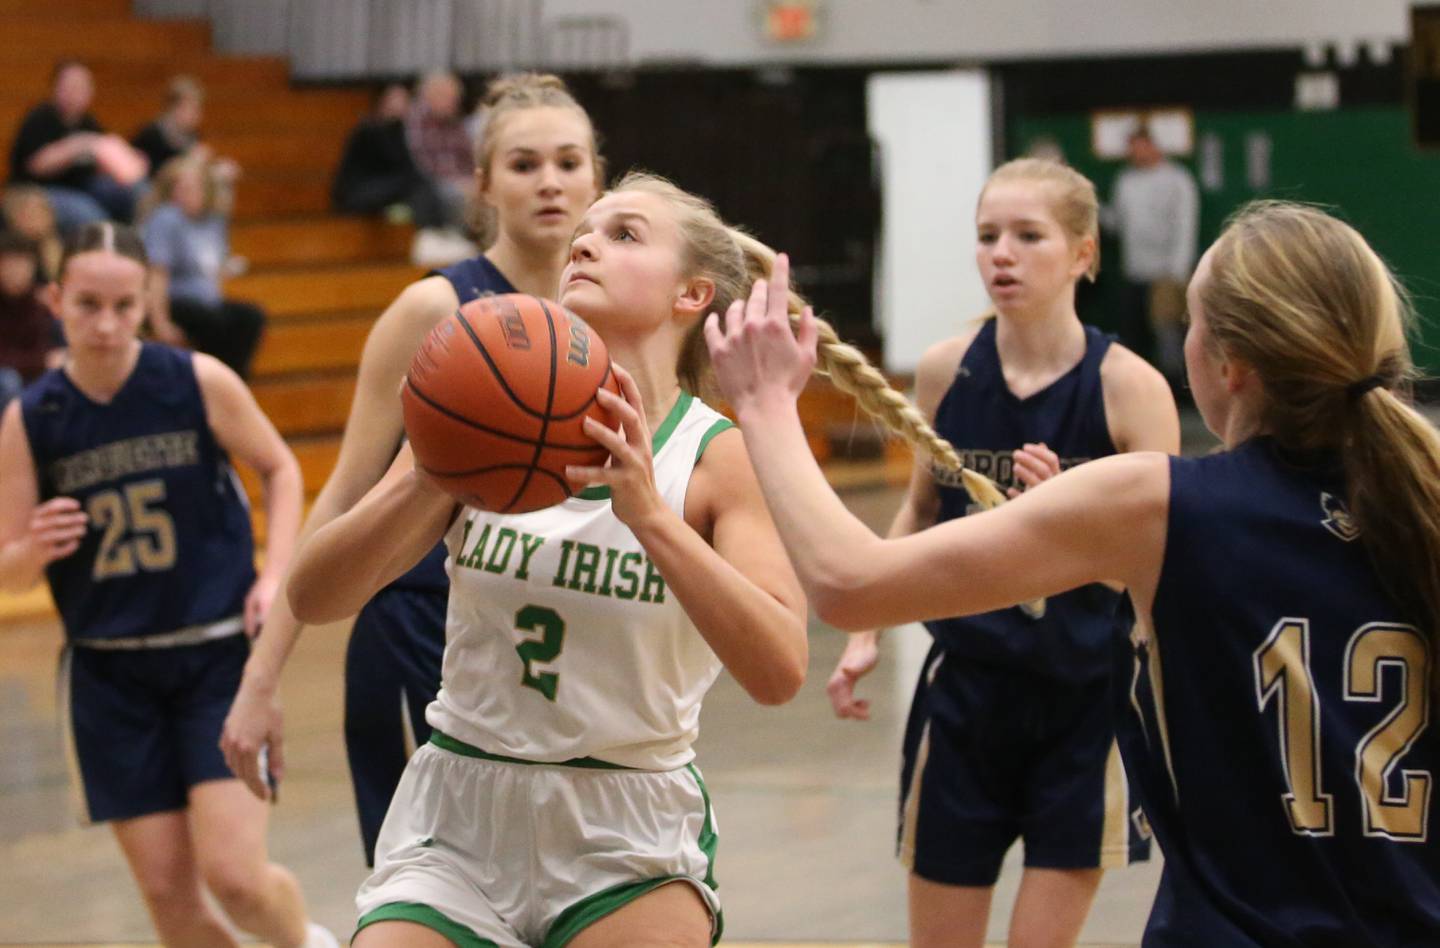 Seneca's Lainie Olson runs into the lane to score a basket against Marquette during the Tri-County Conference Tournament on Tuesday, Jan. 17, 2023 at Midland High School.